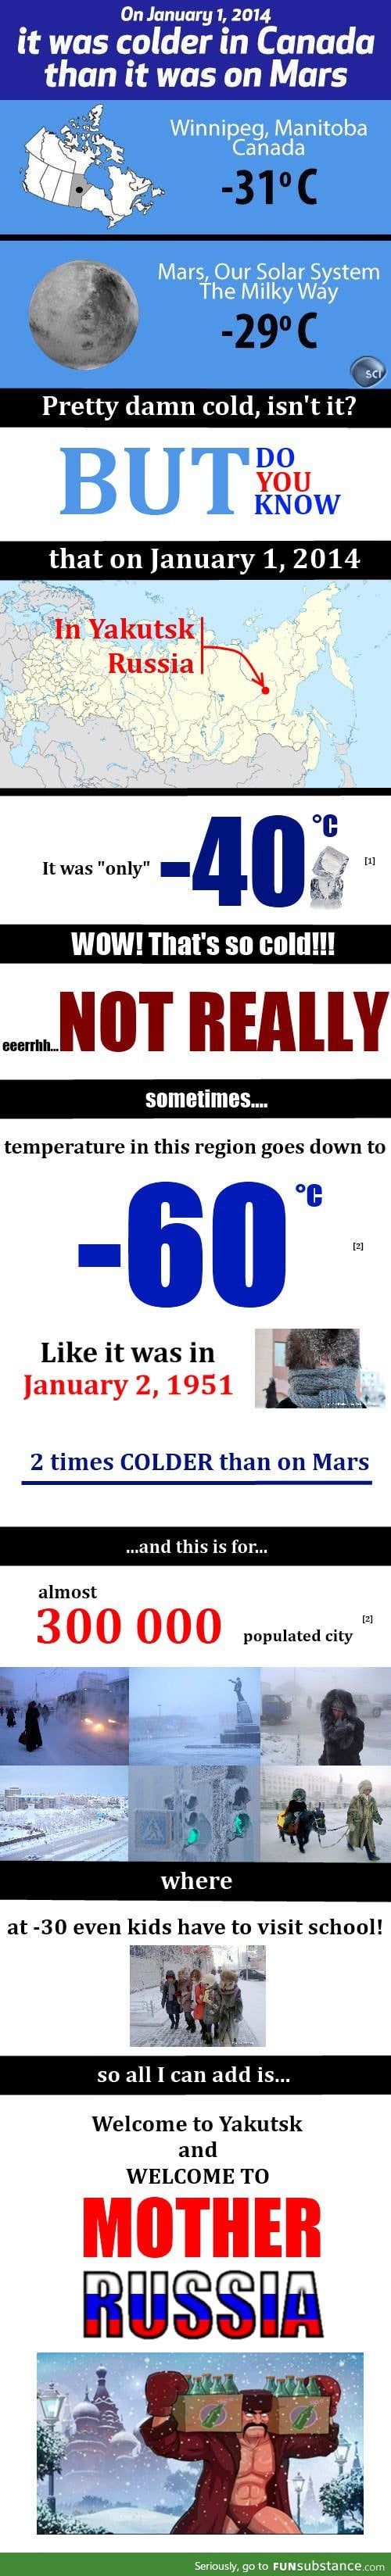 What do you think is really cold?